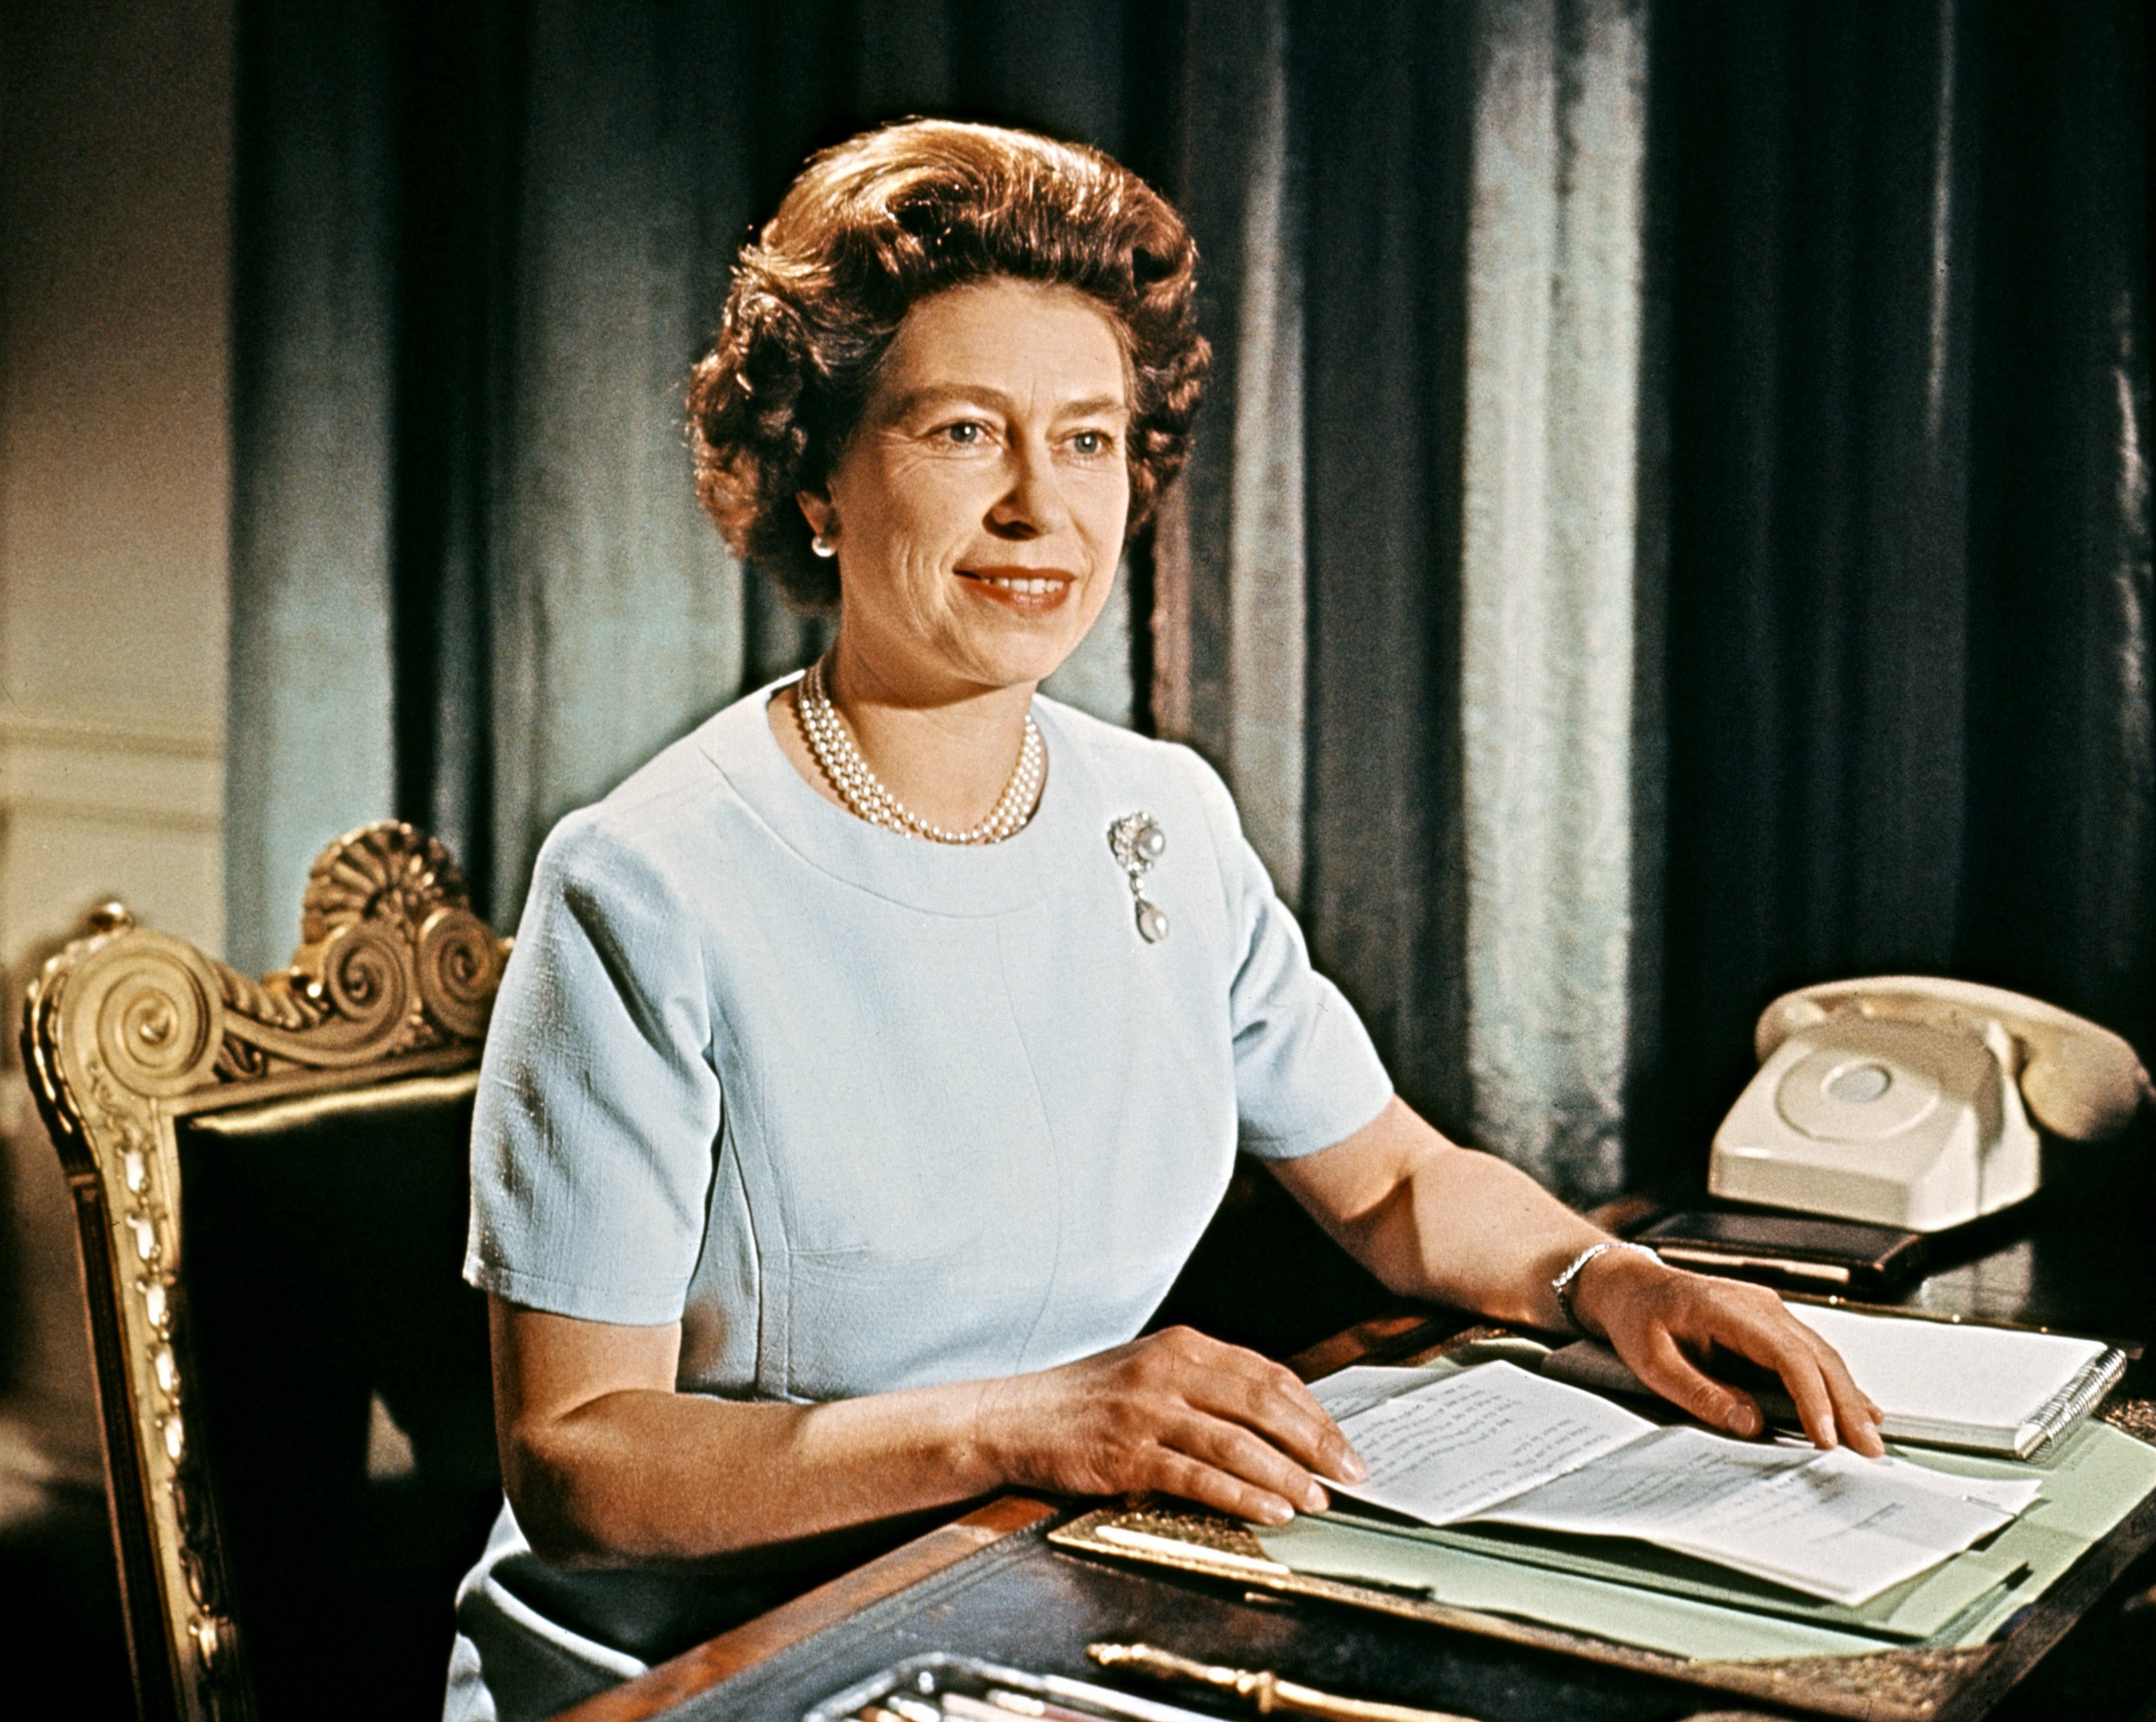 The Queen during the recording of her Christmas message in December 1971